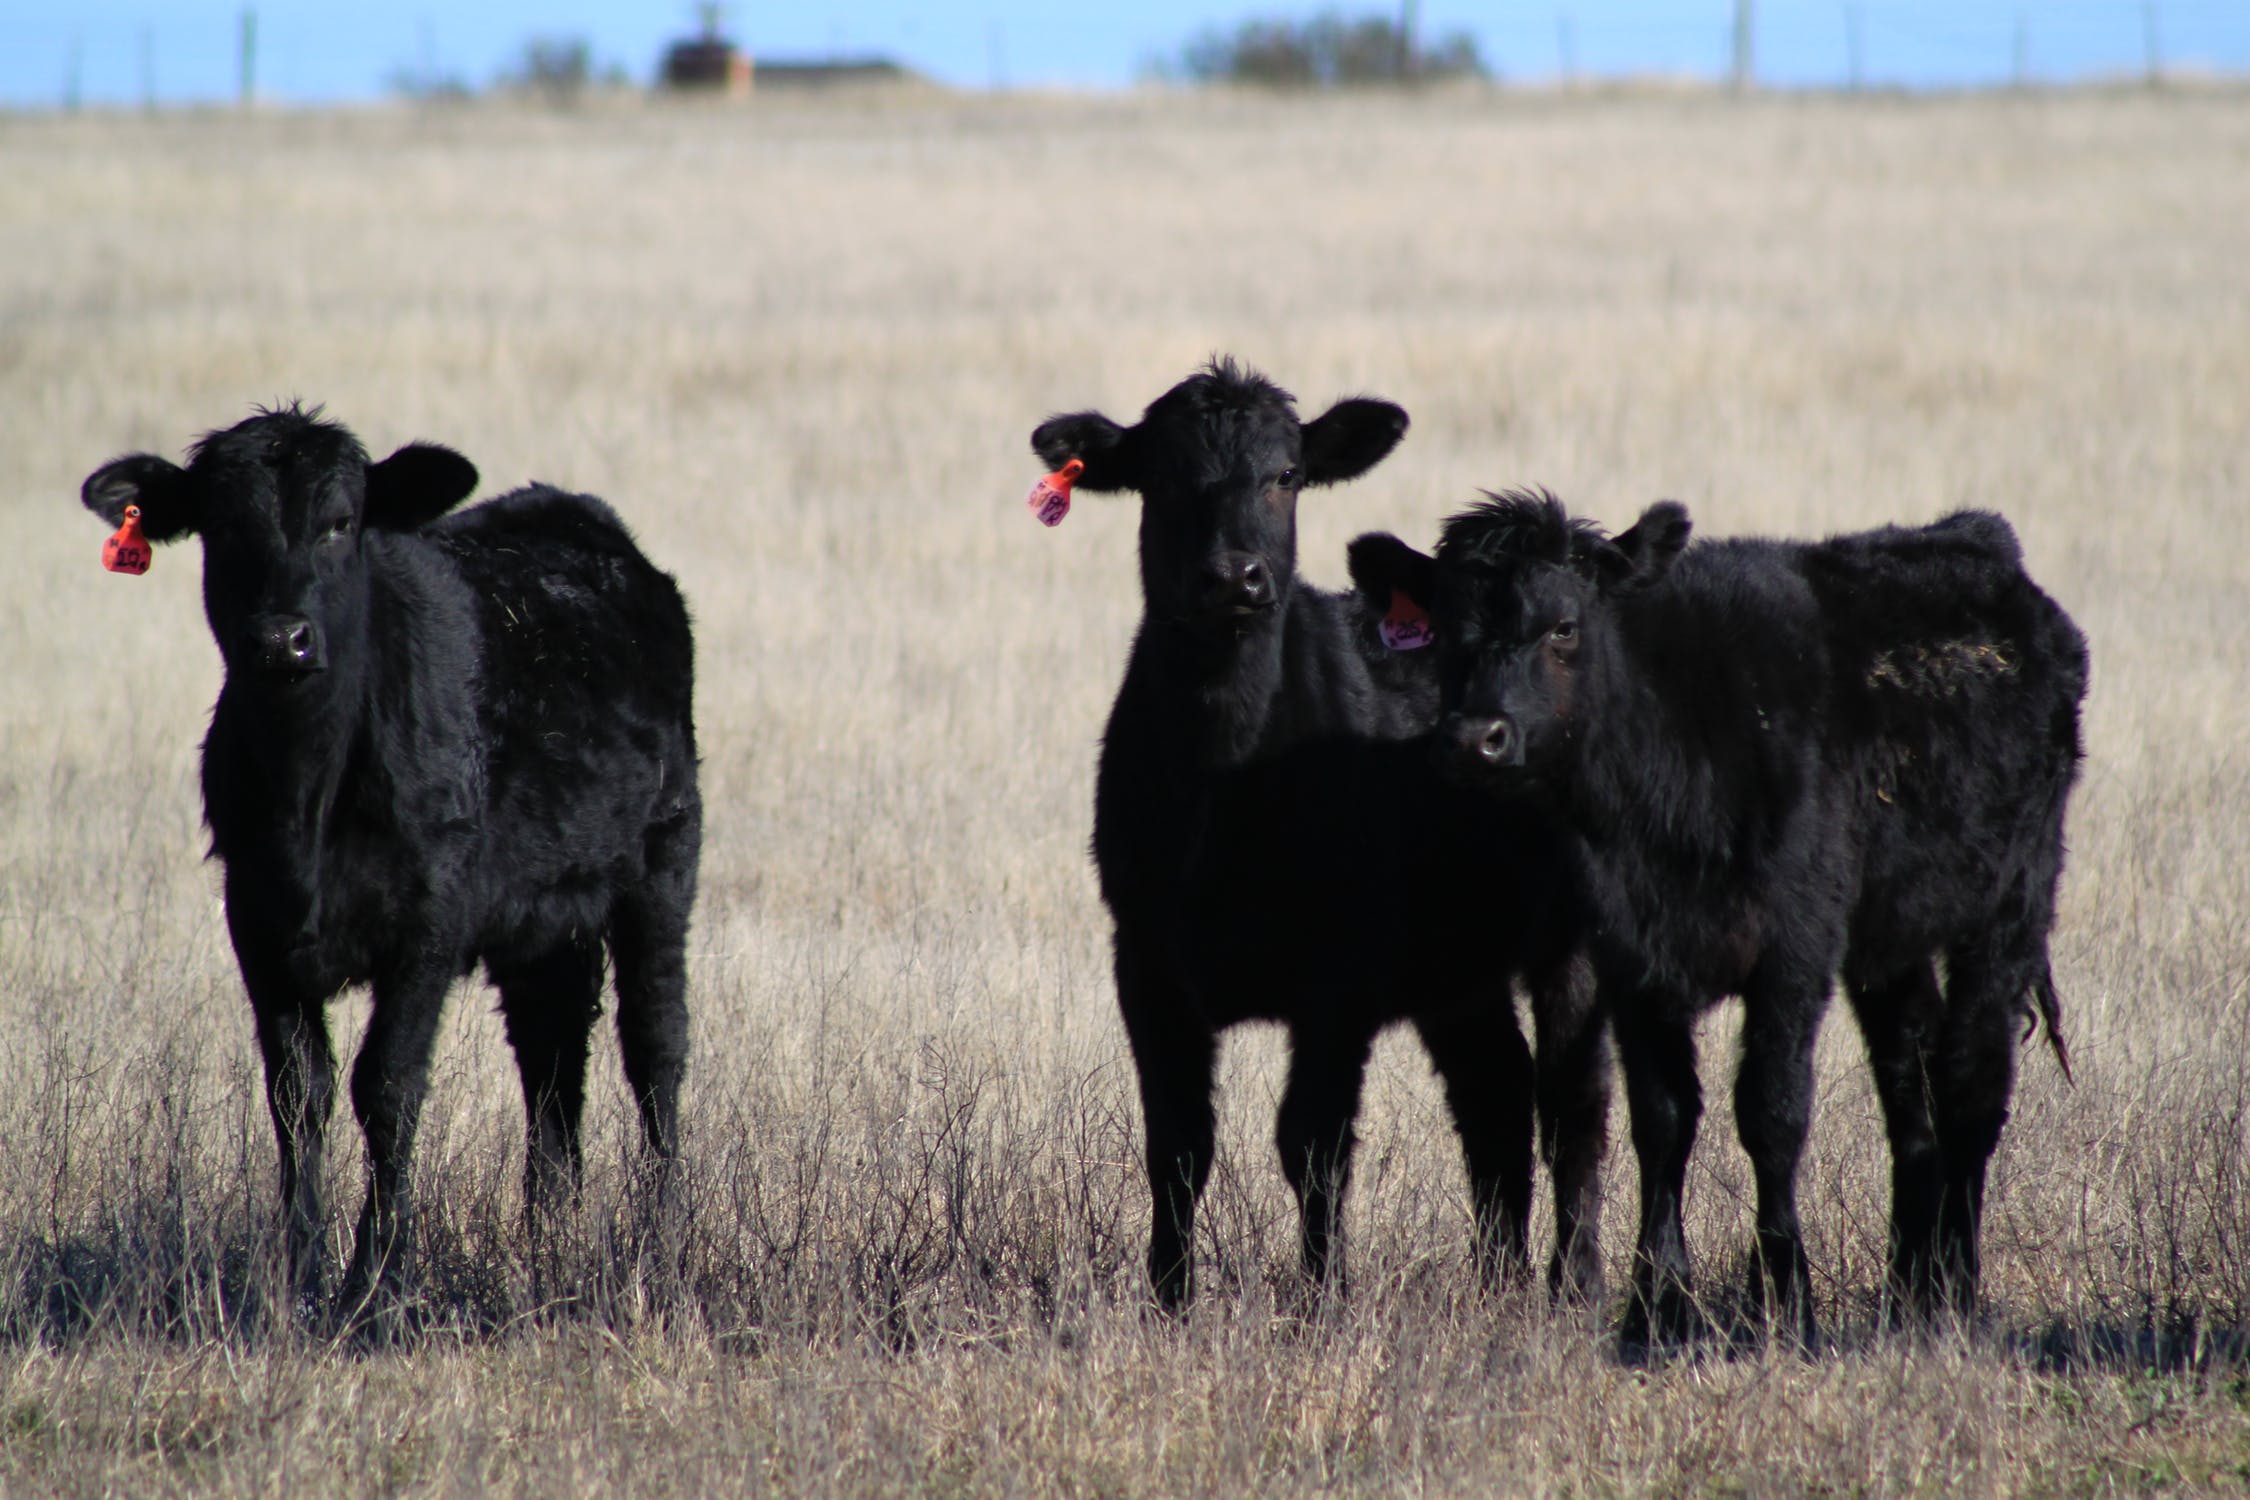 Small group of black angus cattle at pasture.